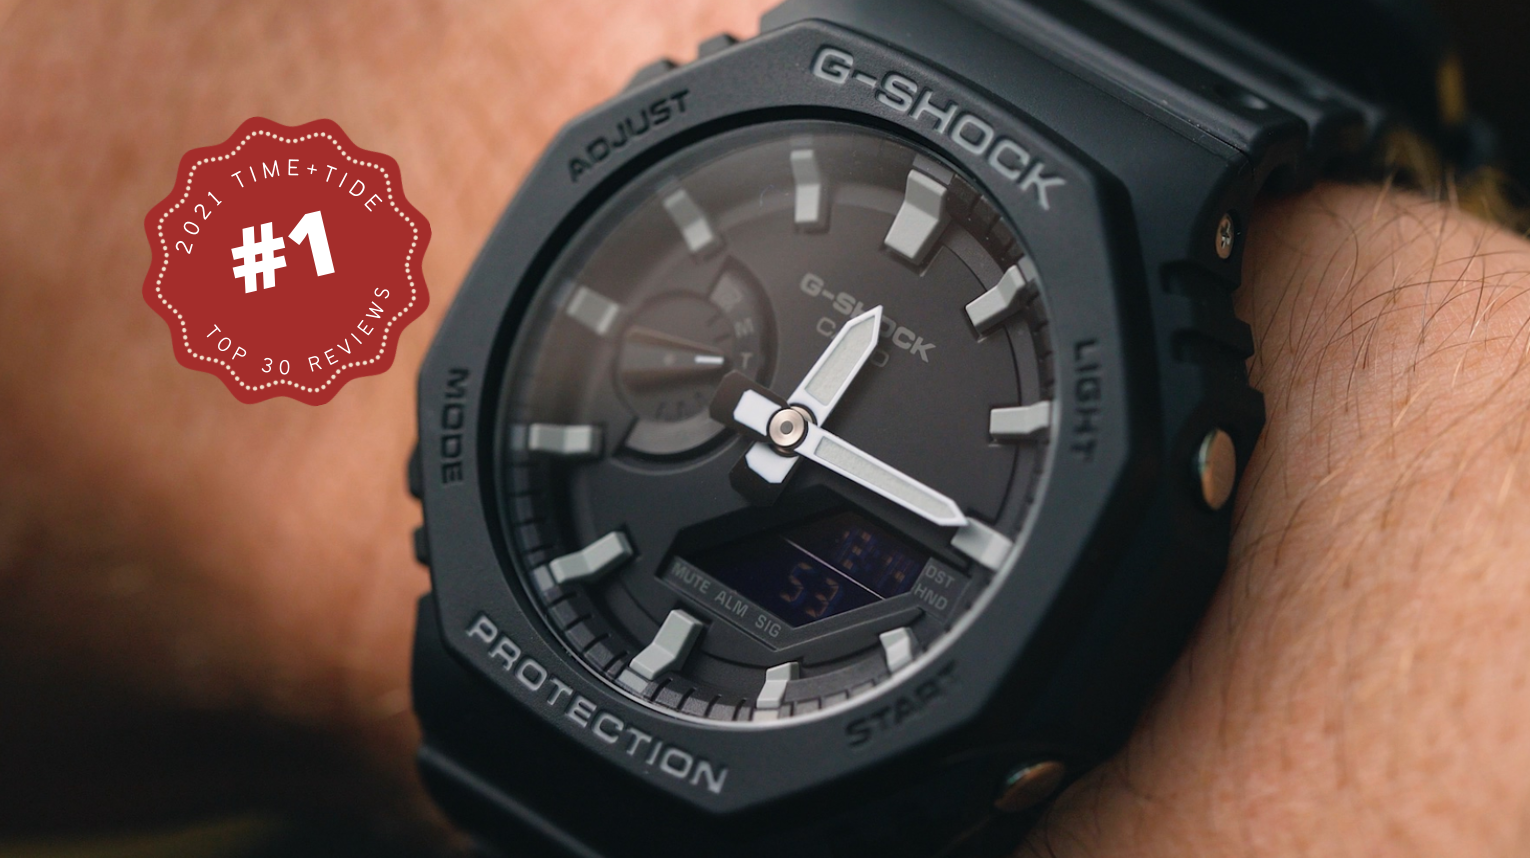 Casio G-Shock GA-2100-1A1ER Watch Review: Is It the Best